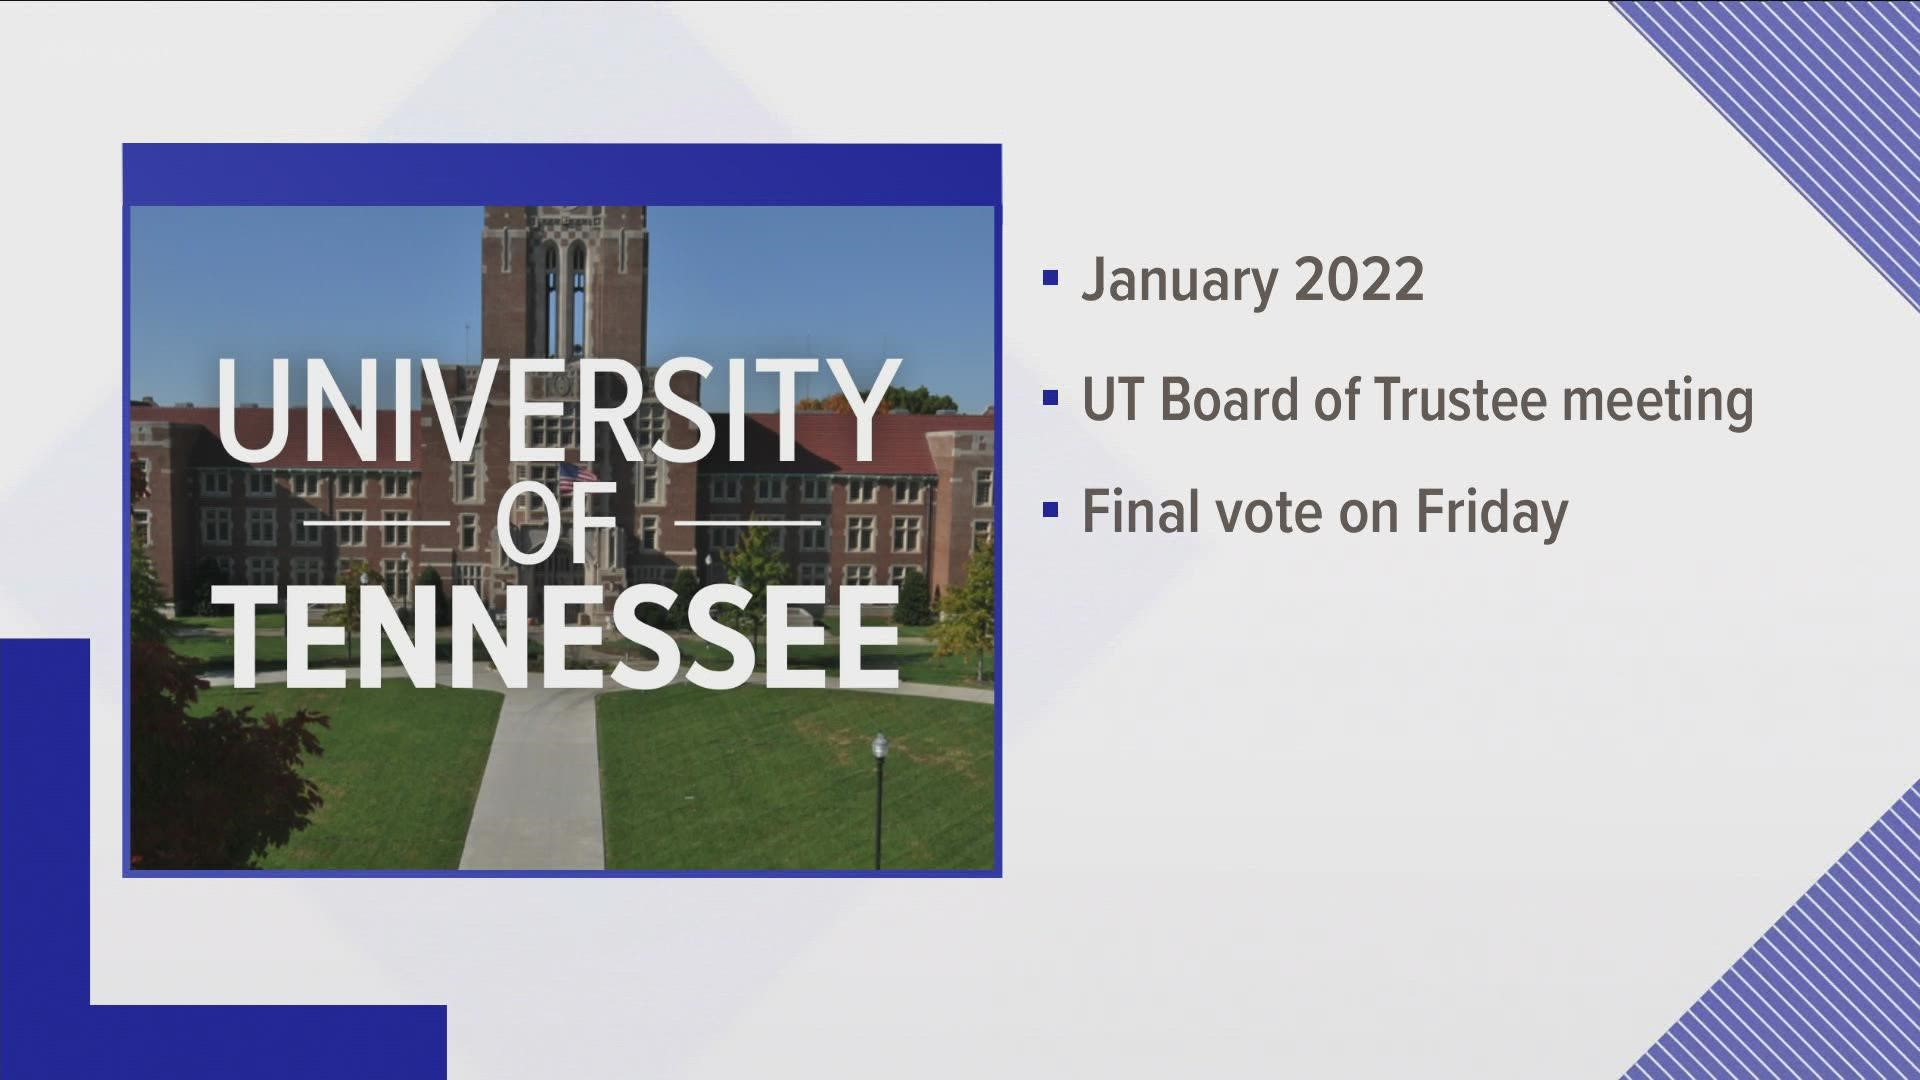 During the UT Board of Trustees meeting on Thursday, UT System President Randy Boyd announced a proposal to increase UTK worker pay.